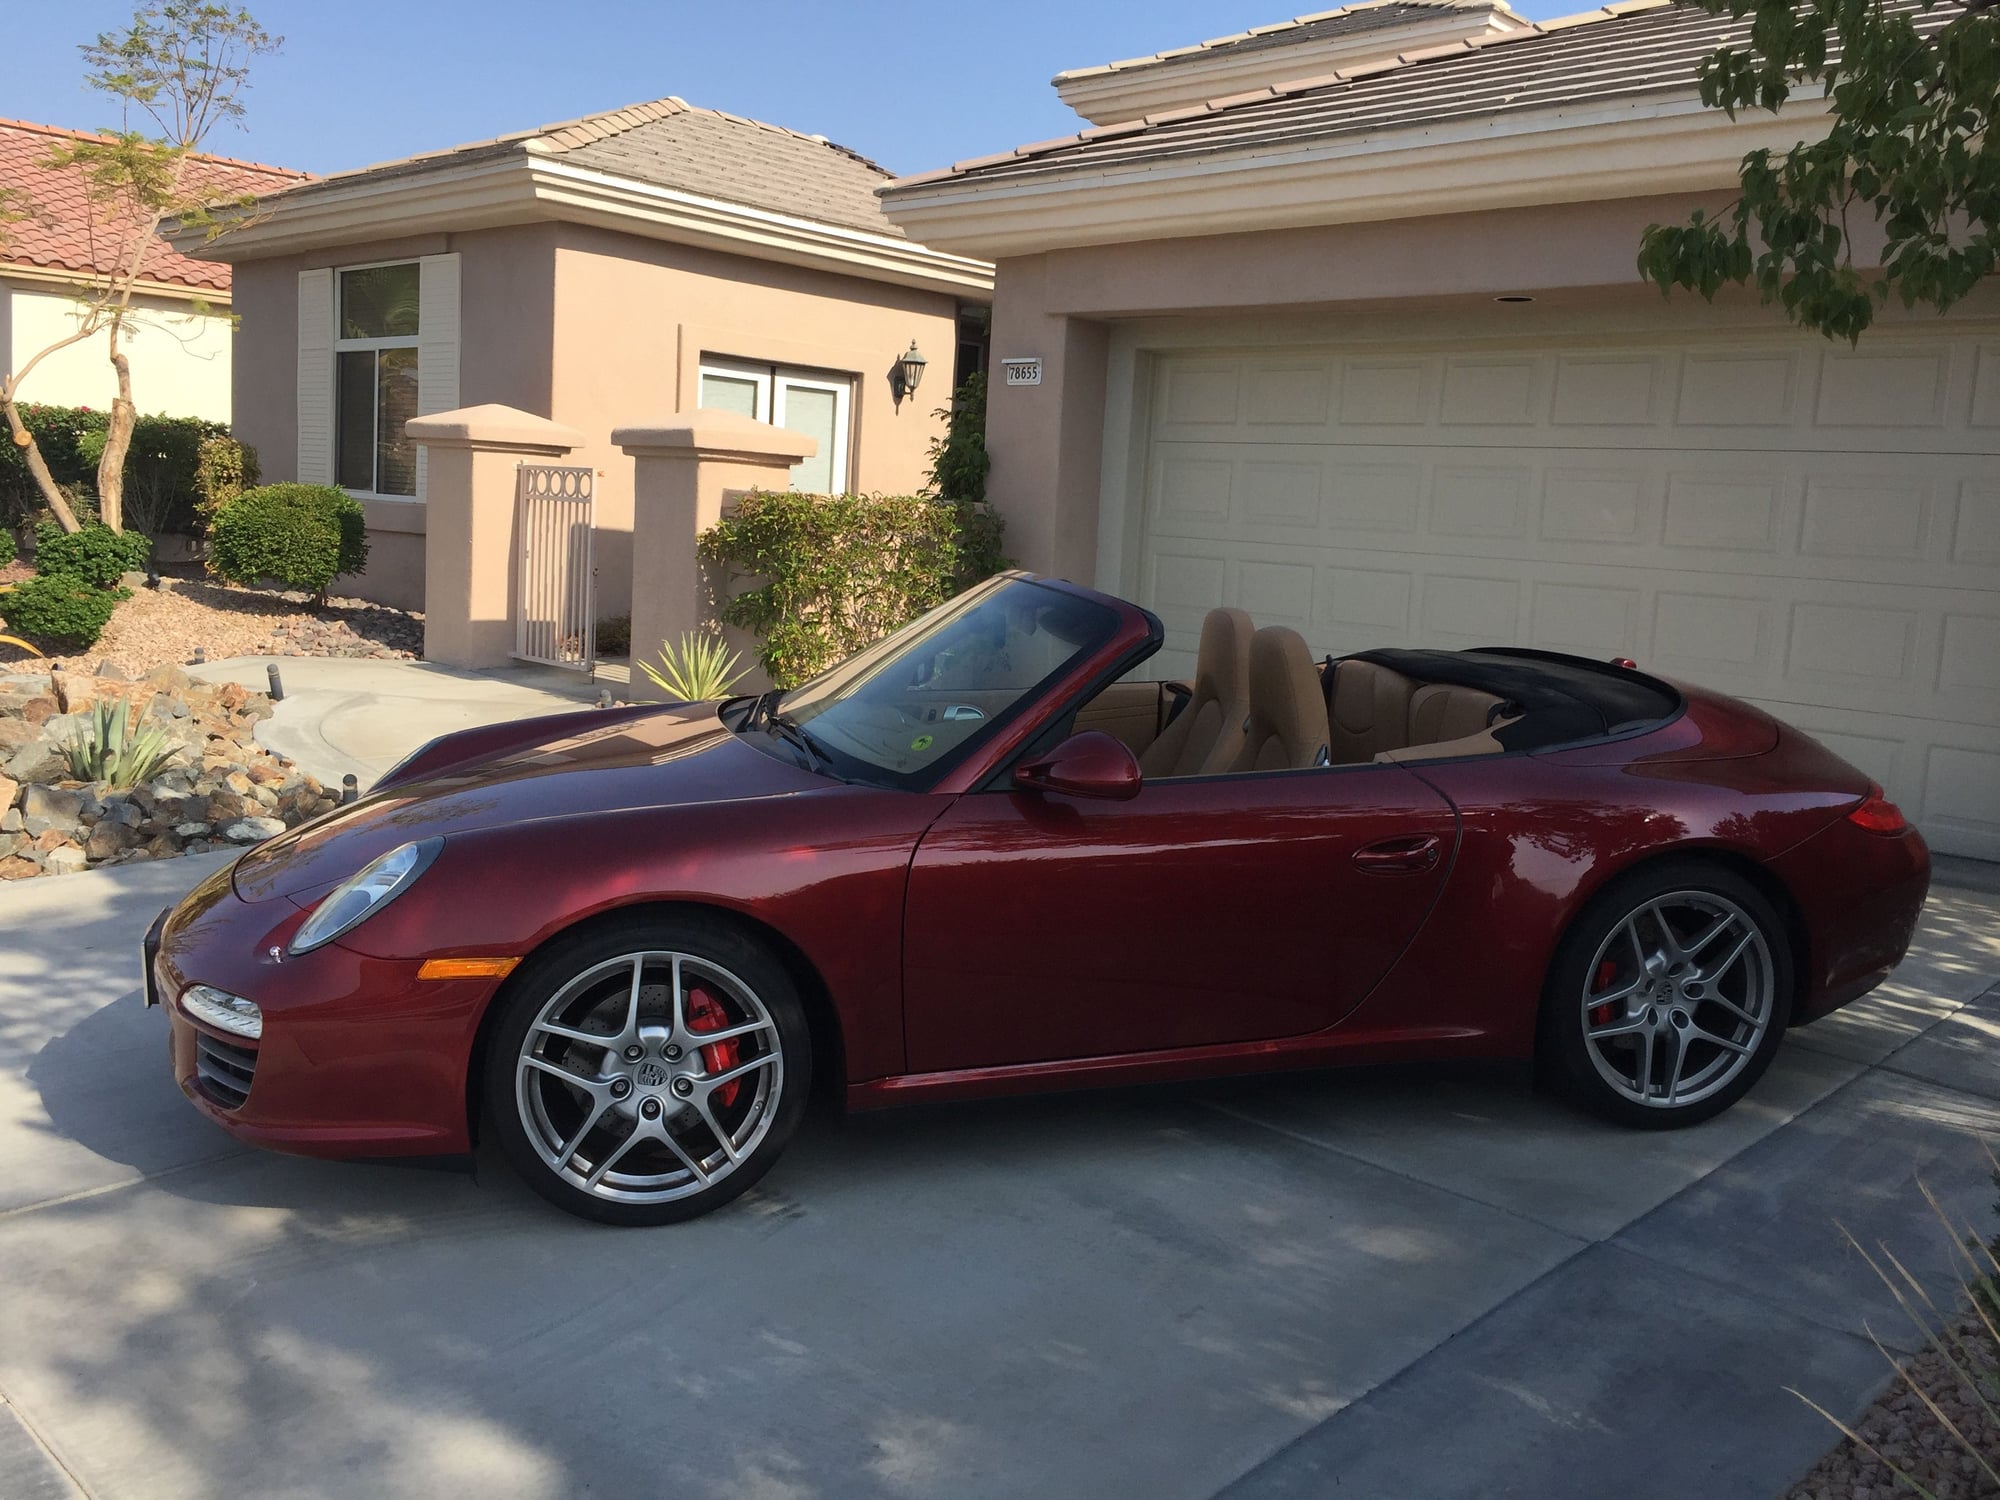 2009 Porsche 911 - 2009 C4S Cabriolet PDK; low miles; red - Used - VIN WP0CB29979S754583 - 19,200 Miles - 6 cyl - AWD - Automatic - Convertible - Red - Santa Monica, CA 90405, United States